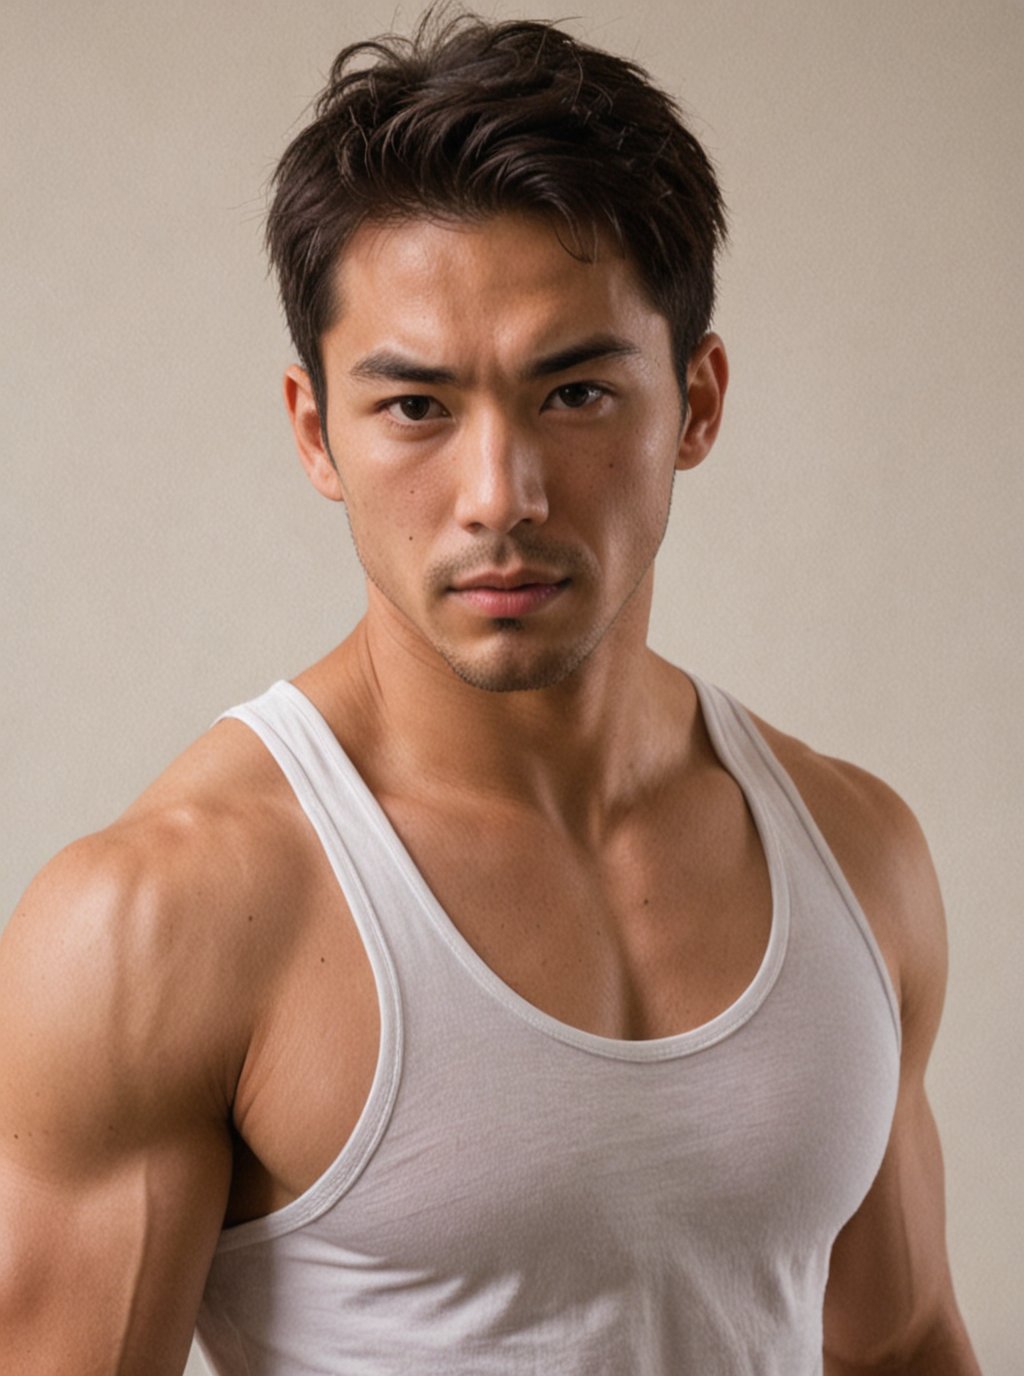 Score_9, score_8_up, score_7_up, score_6_up, score_5_up, score_4_up, rating_questionable,A sultry masculinity embodied in an Americano shot portrait: A rugged Japanese man with piercing dome eyes, short hair, and chiseled physique glistens with sweat, radiating health after an intense workout. He stands tall, wearing a fitted white tank top that accentuates his impressively chiseled muscles. Sharp focus and flat colors emphasize the textured oiled skin as he strikes a provocative pose, exuding confidence and masculinity.